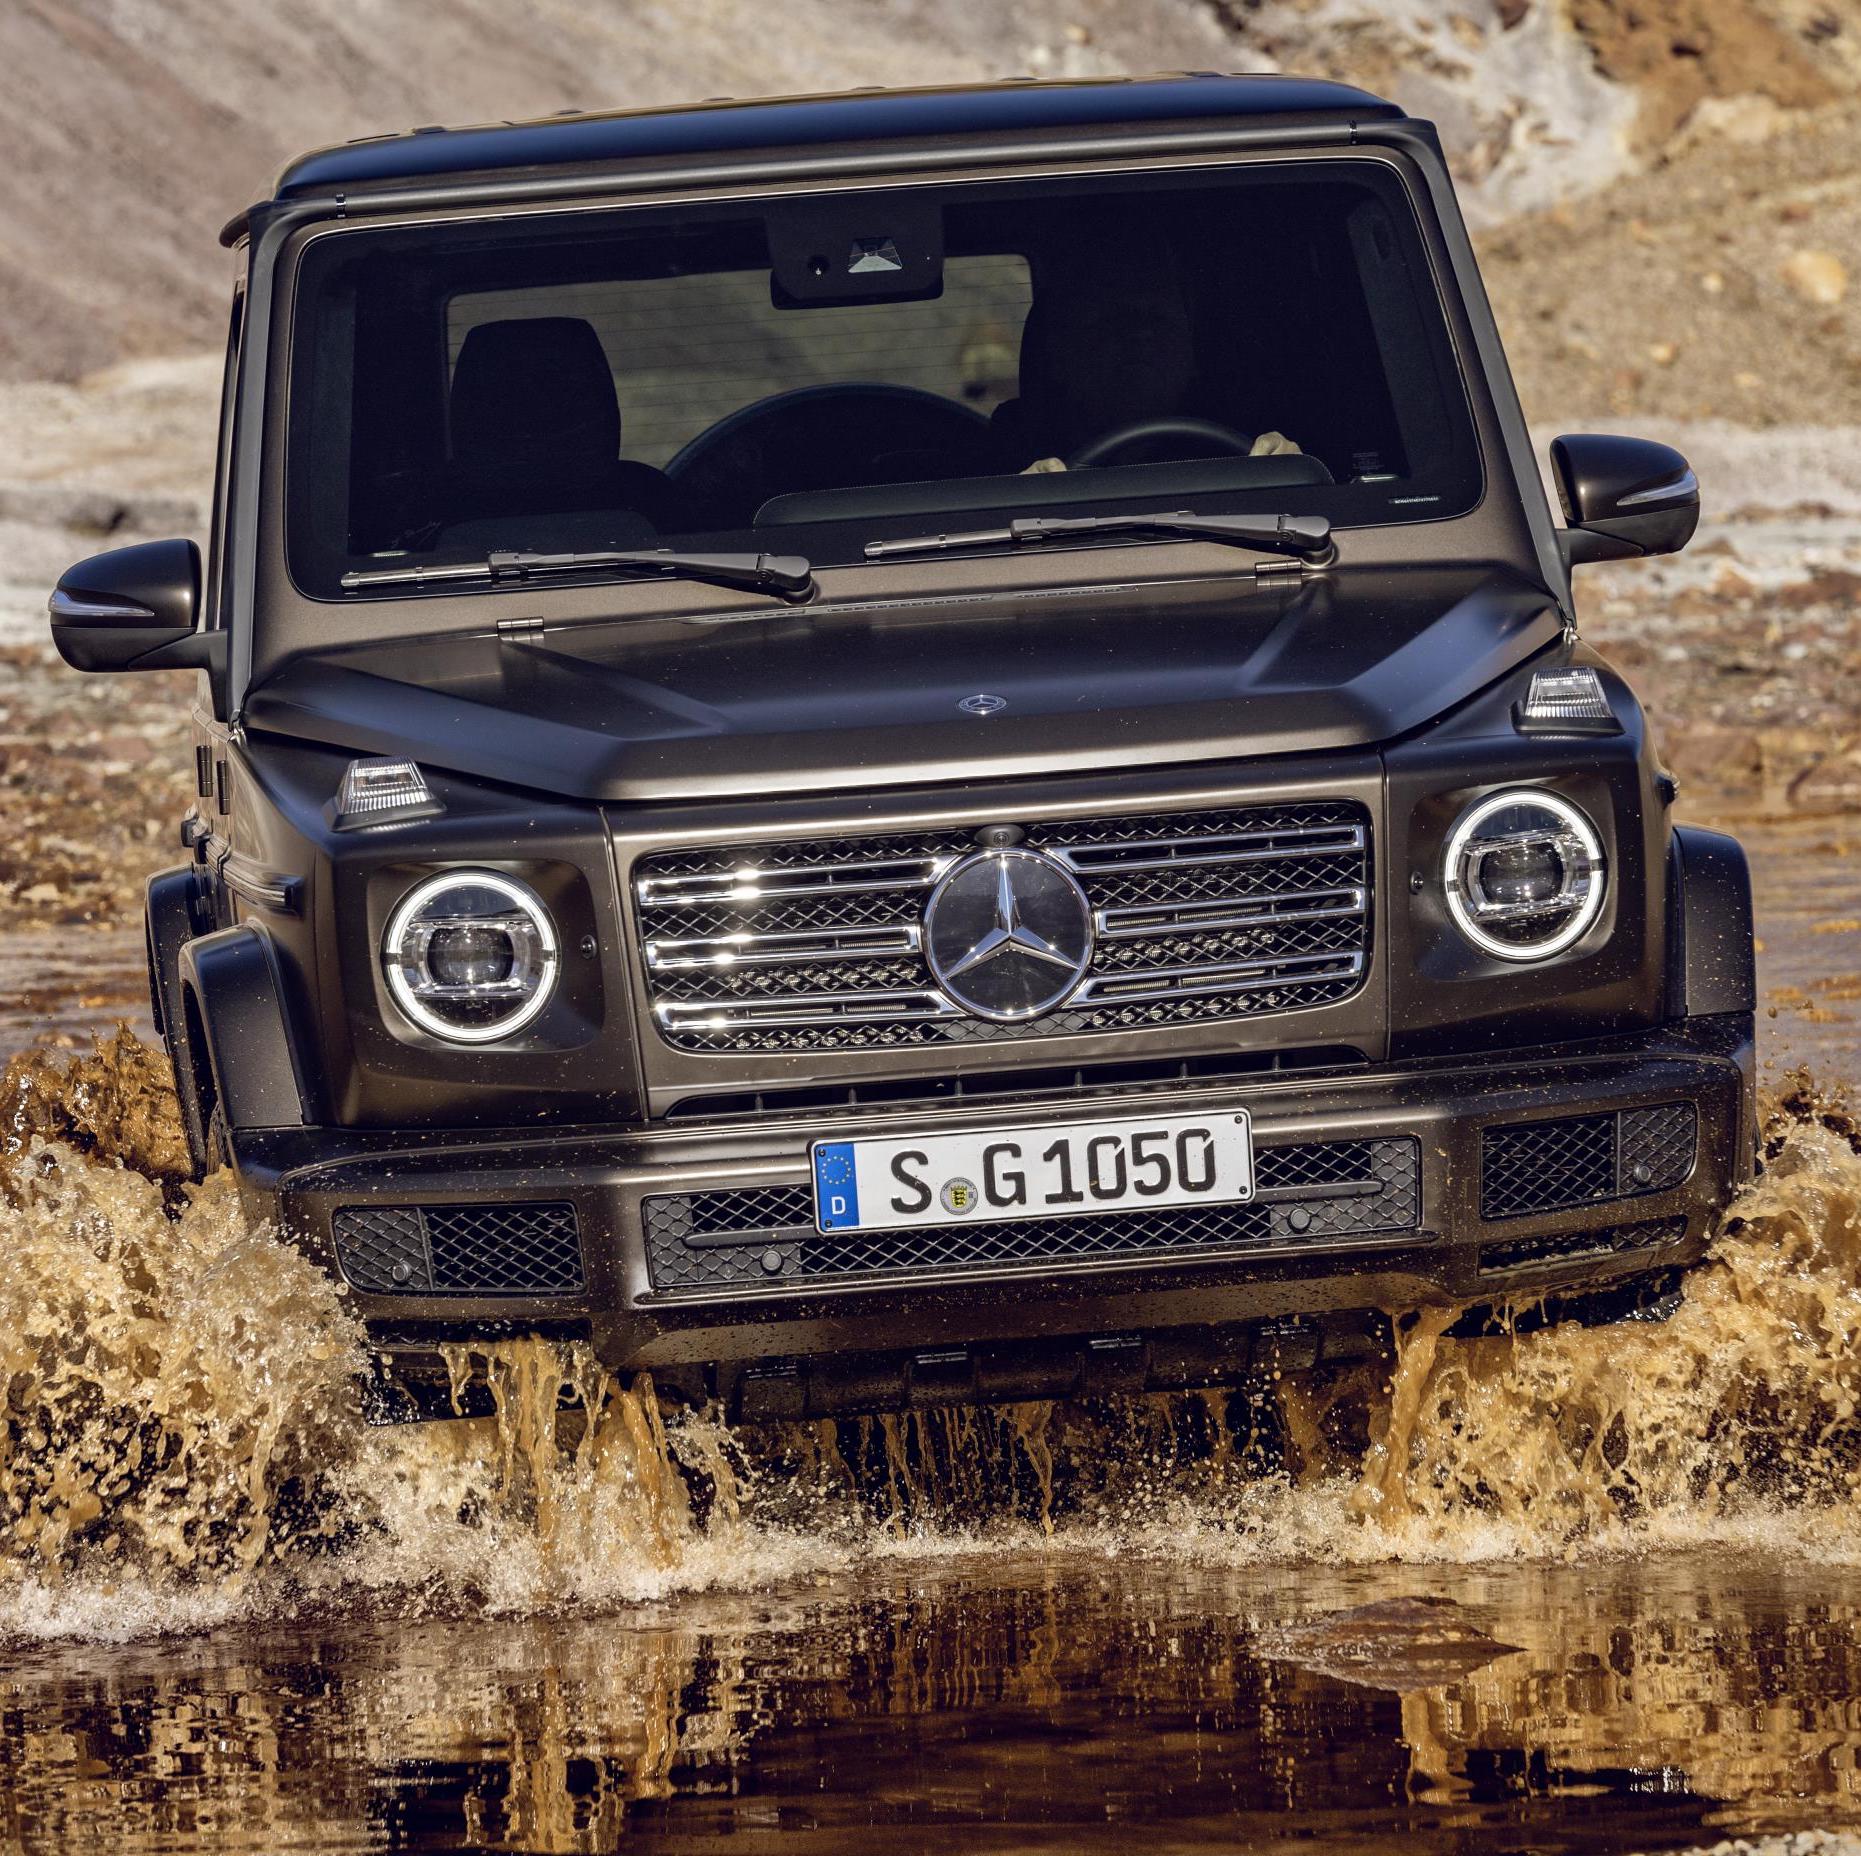 Mercedes Benz G Class Vs Range Rover Which Is The Best Luxury Suv The Week Uk